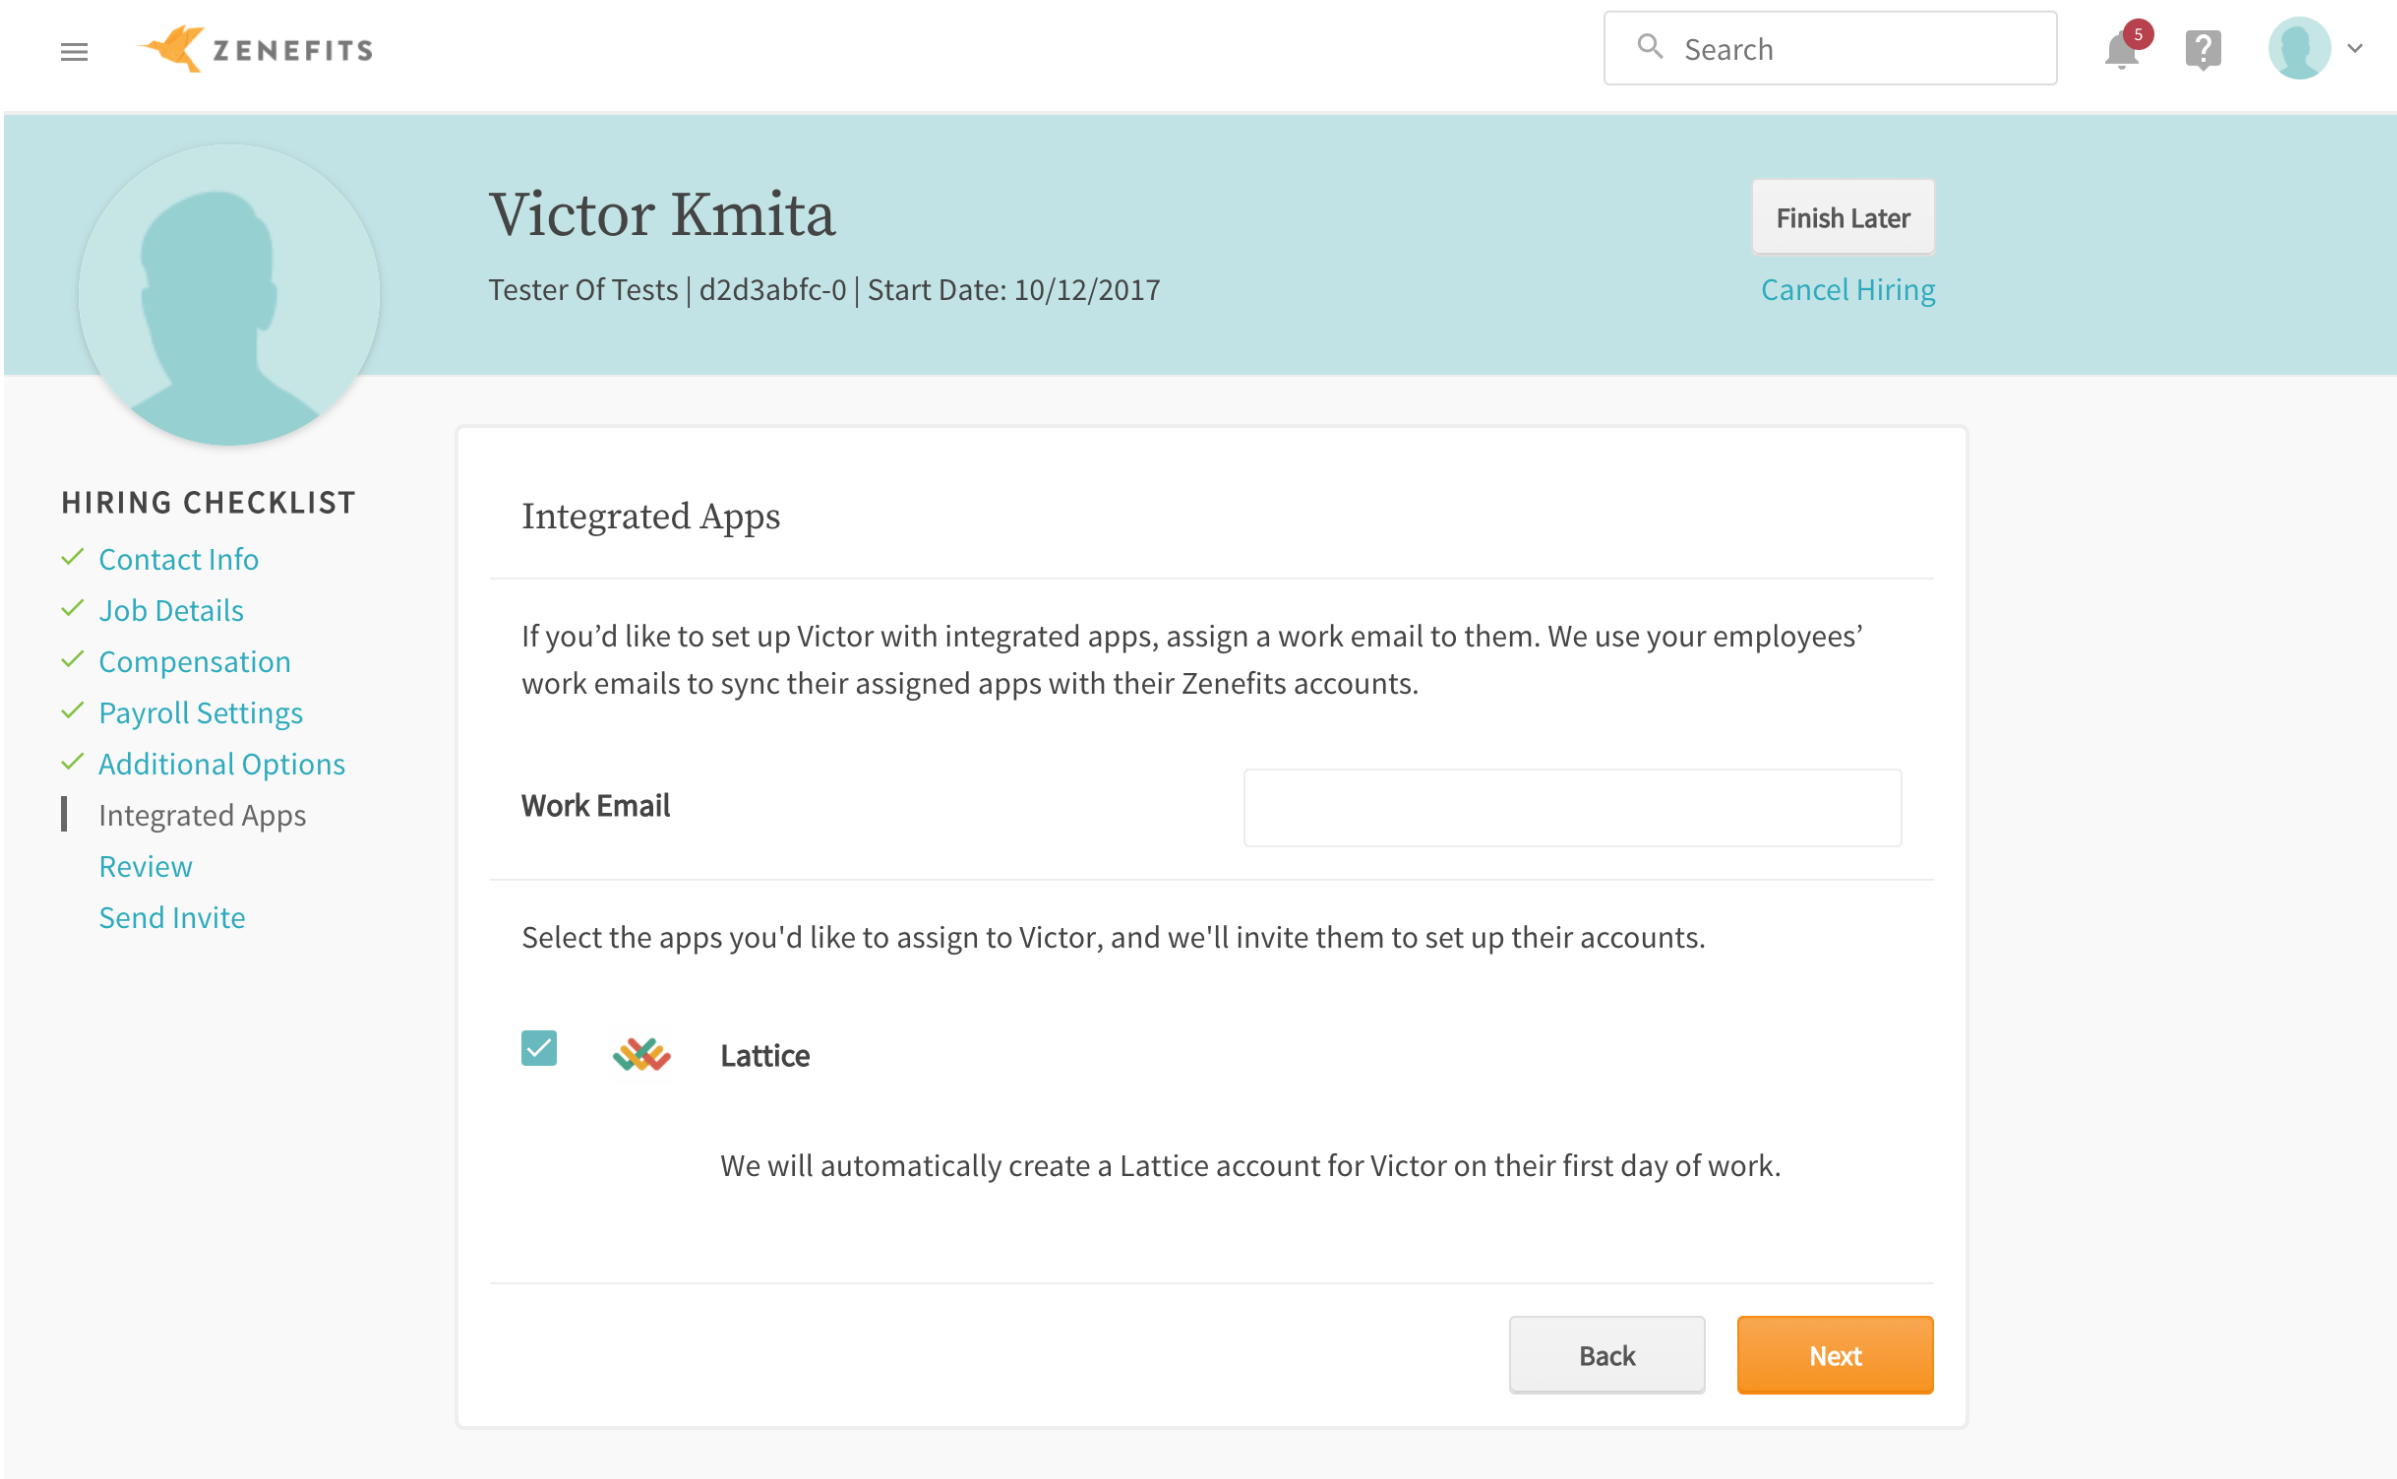 Screenshot of Intgrated Apps steps in Zenefits when adding new users